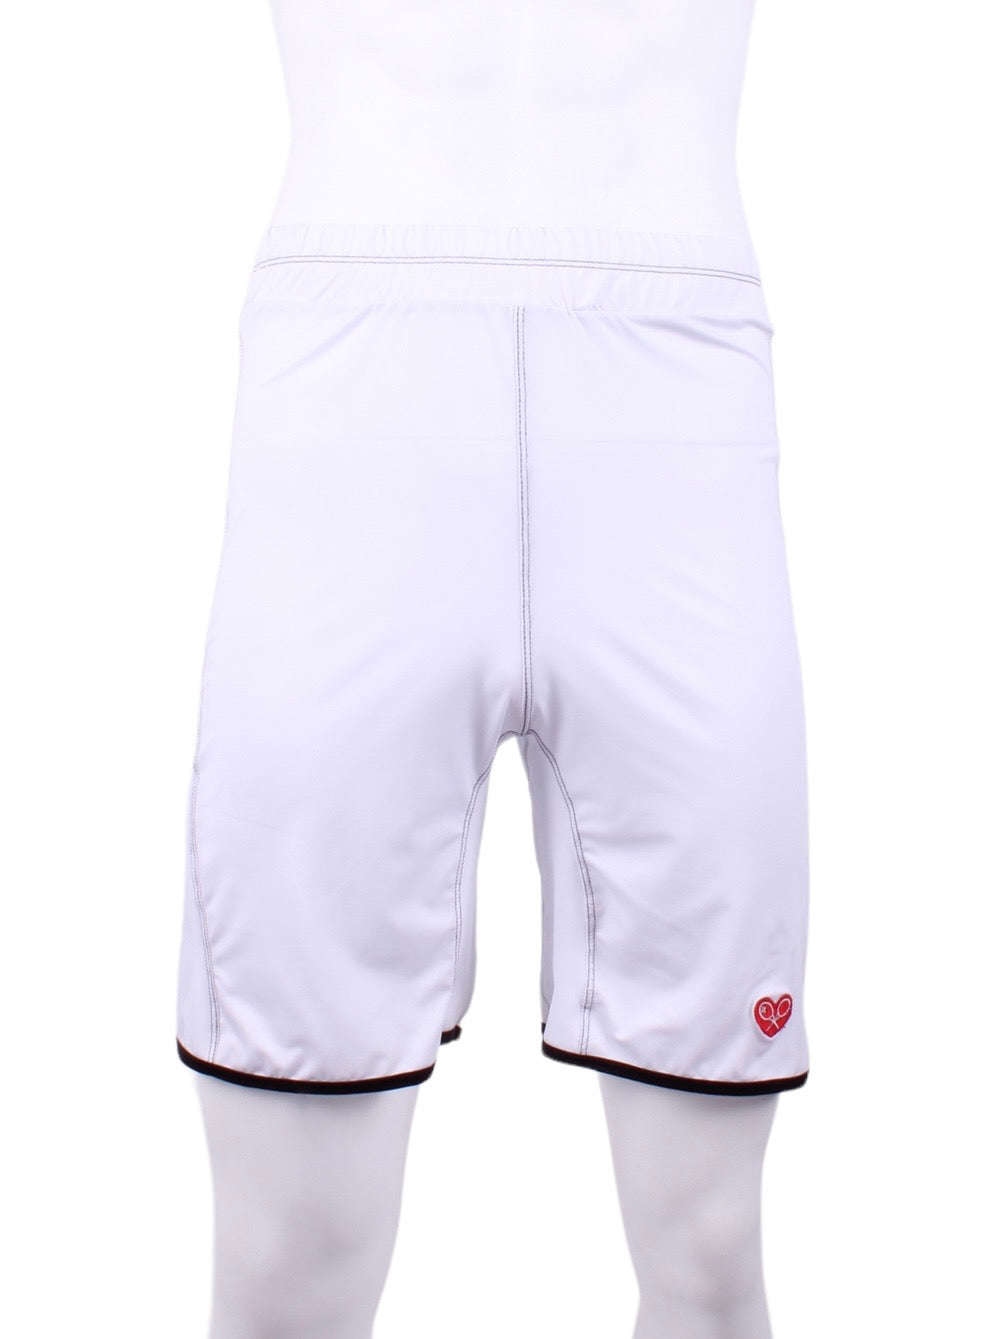 This is our limited edition Short Men’s Shorts White.  This piece has a silky and soft fabric.   We make these in very small quantities - by design.  Unique.  Luxurious.  Comfortable.  Cool.  Fun.